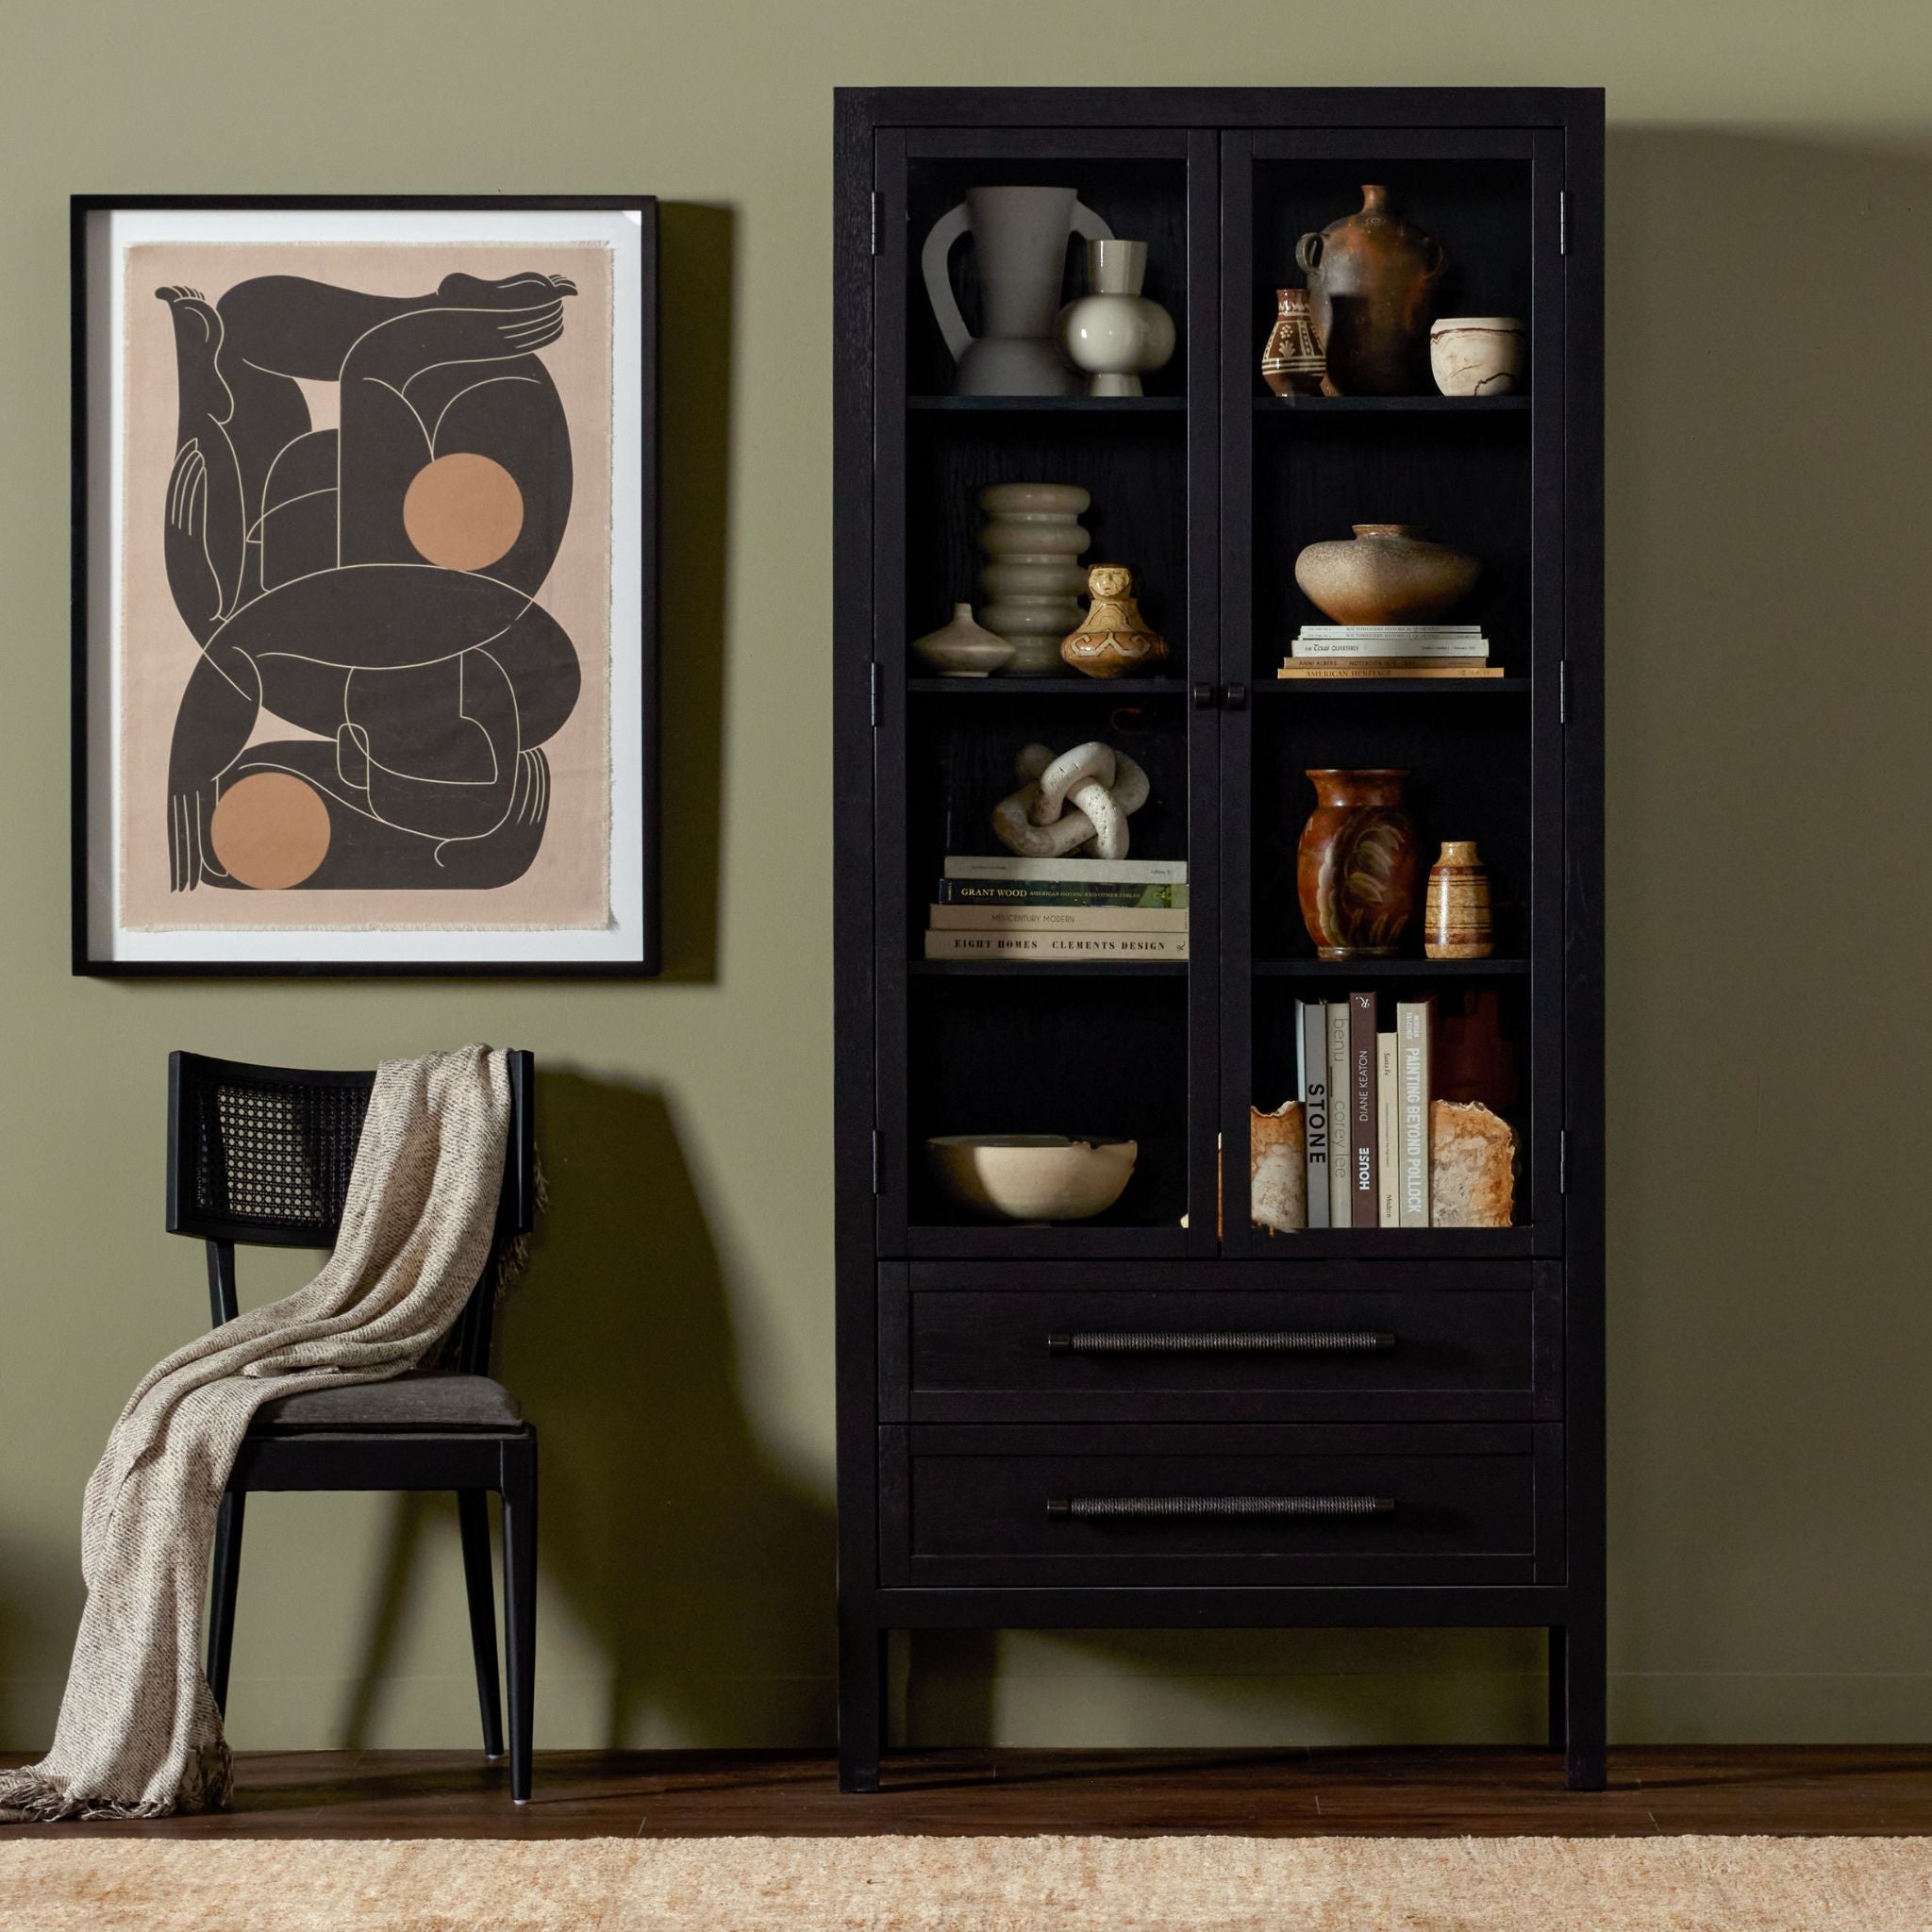 Simply Elevated - Our Laker Cabinet is crafted with attention to detail, this cabinet features glass-front doors, ample storage and display space, and thoughtful touches that enhance its visual appeal.